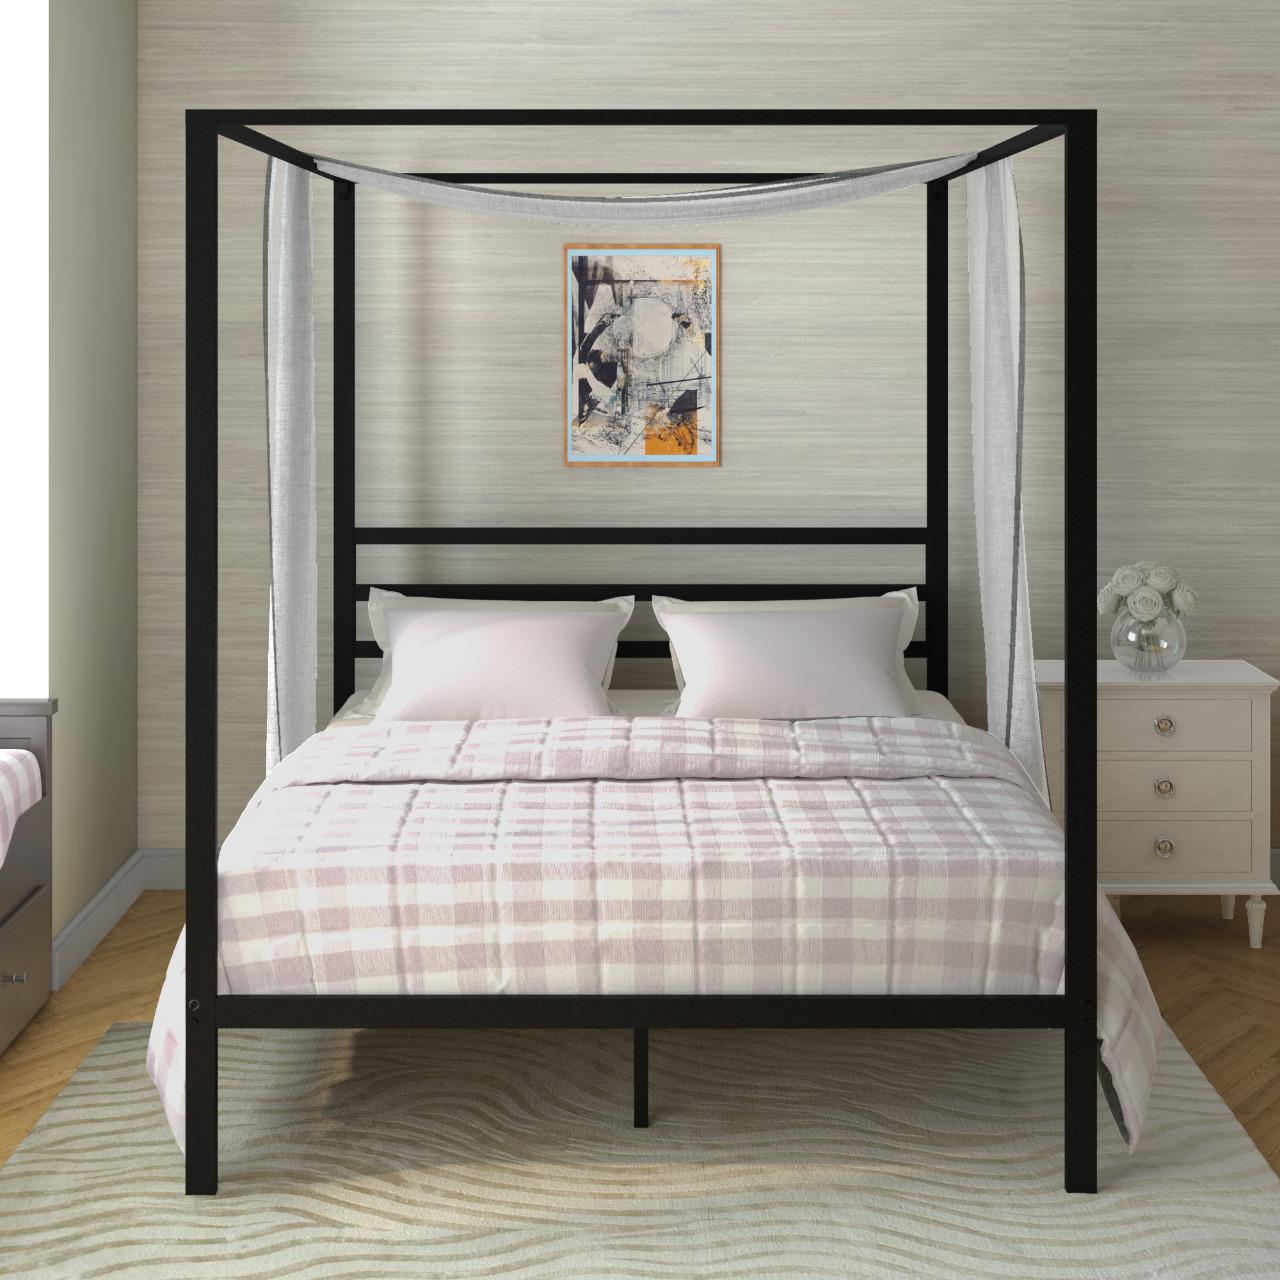 Canopy Bed - Black - Ambee21